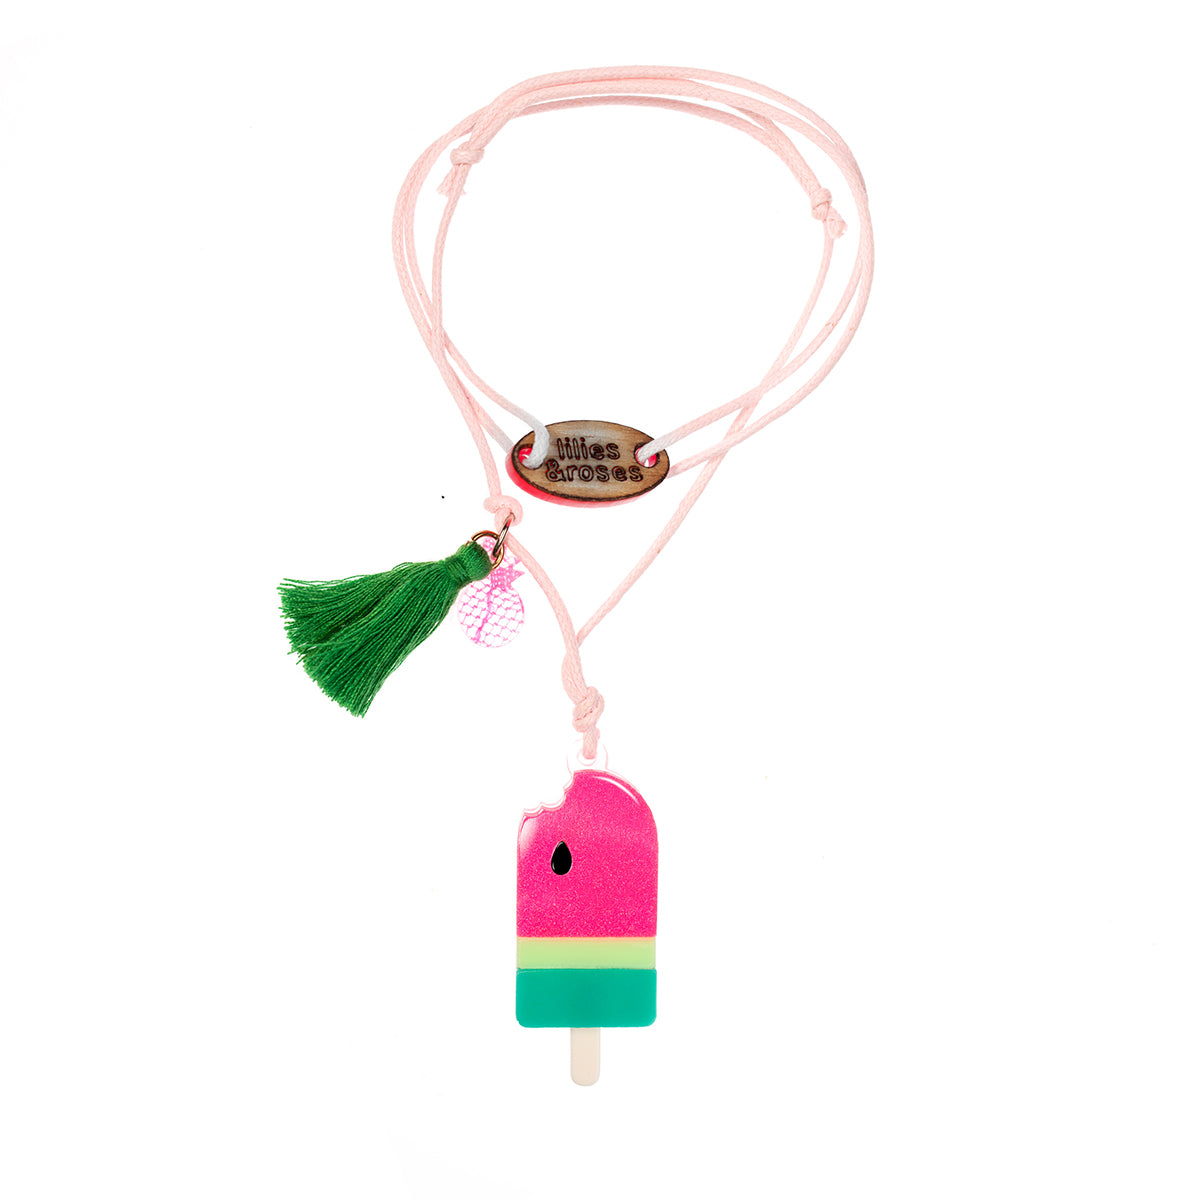 Limited Edition Watermelon Popsicle Necklace